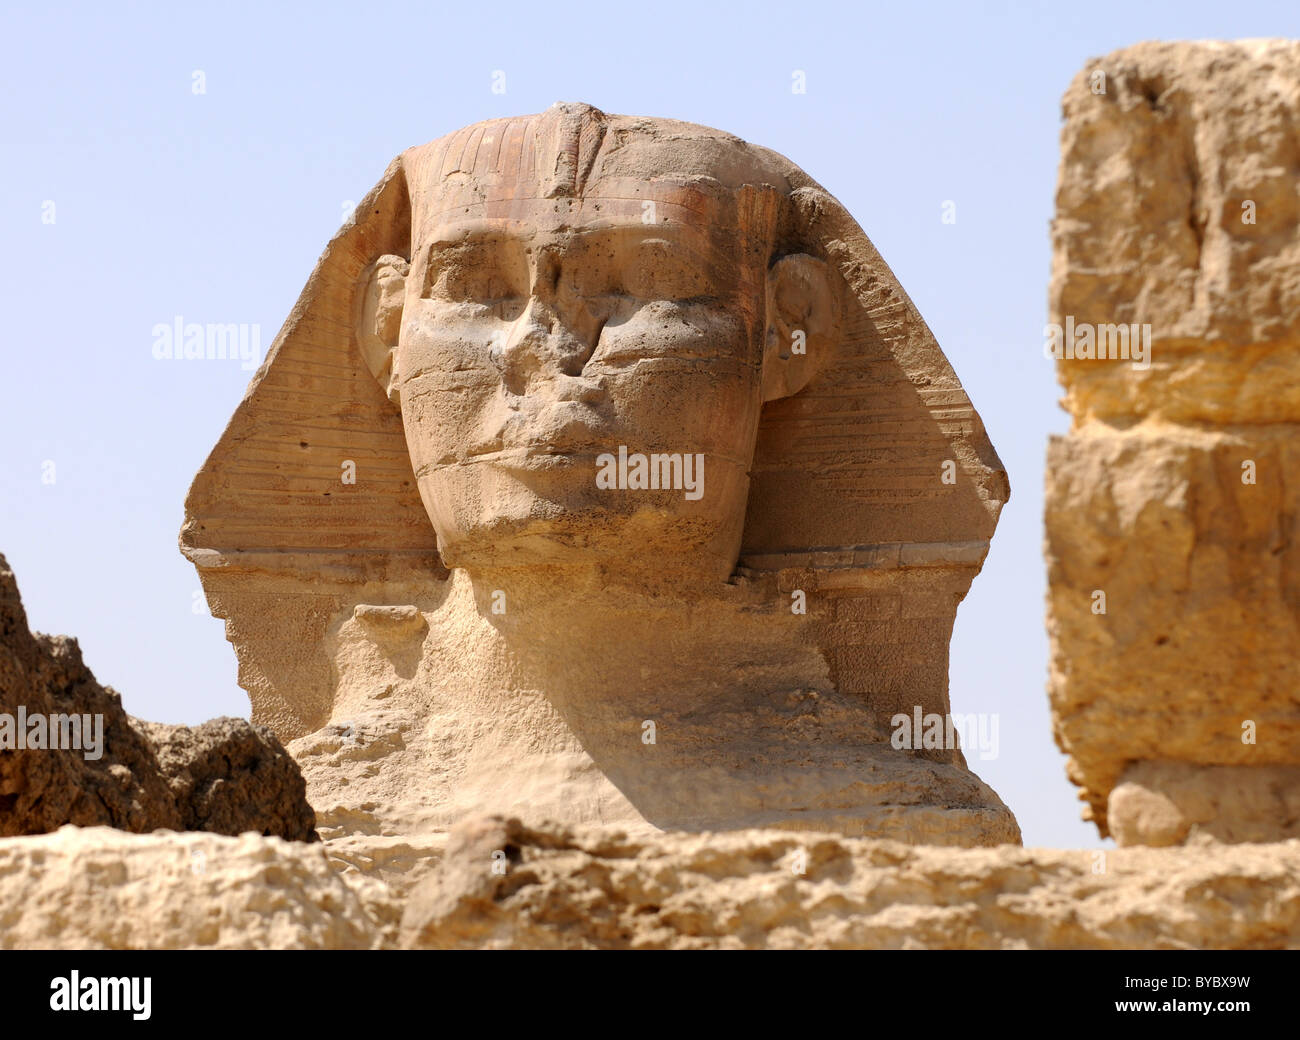 Sphinx, Giza, Egypte Banque D'Images